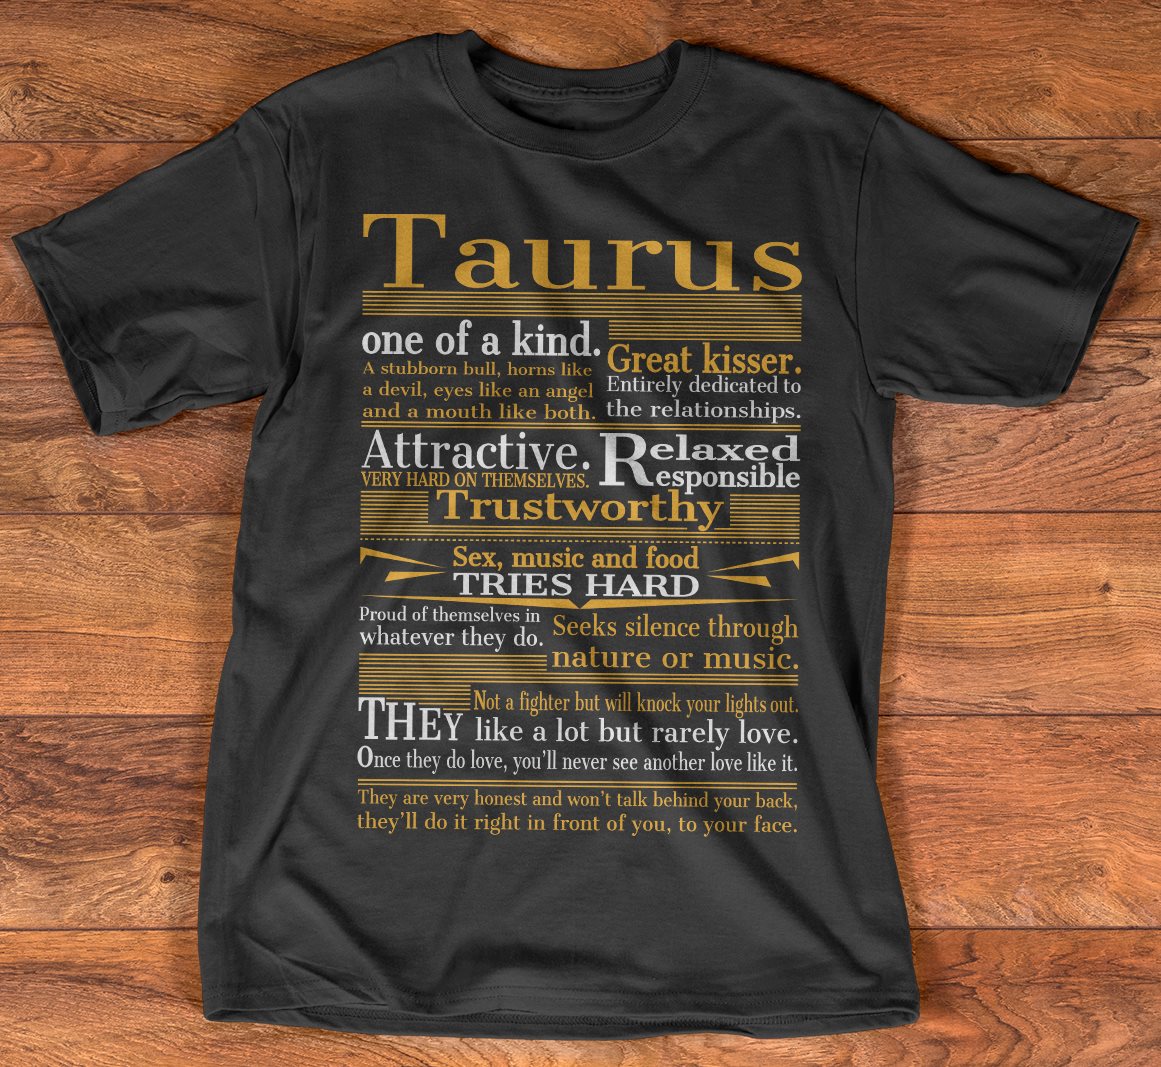 Taurus T-Shirt One of A Kind Great Kissed Taurus T-Shirt for Men Women